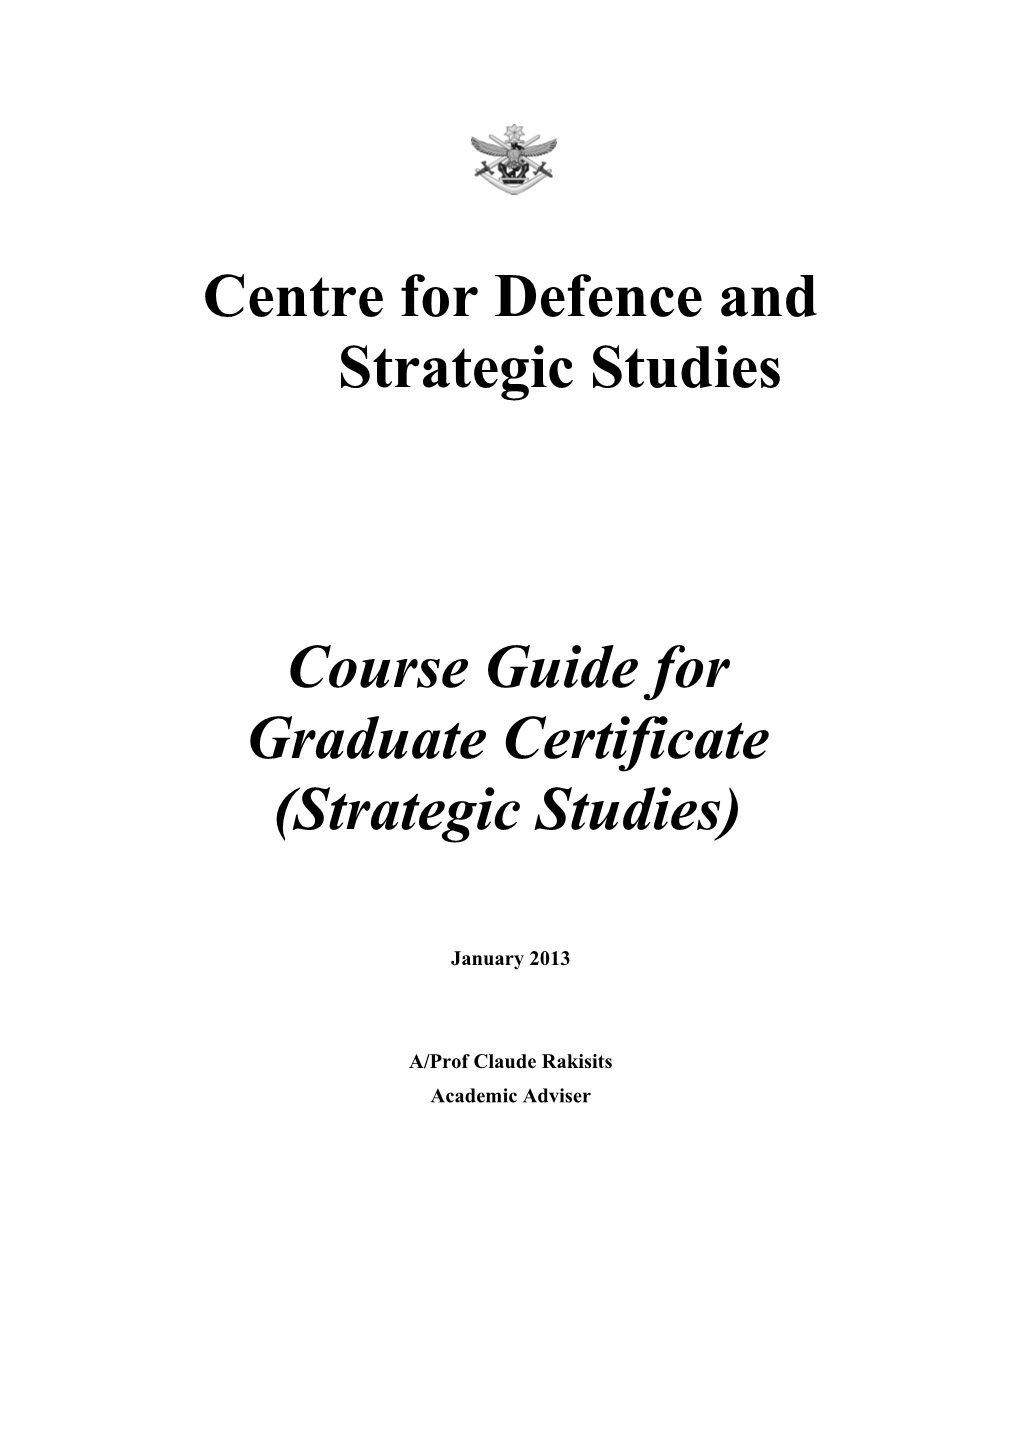 Centre for Defence and Strategic Studies